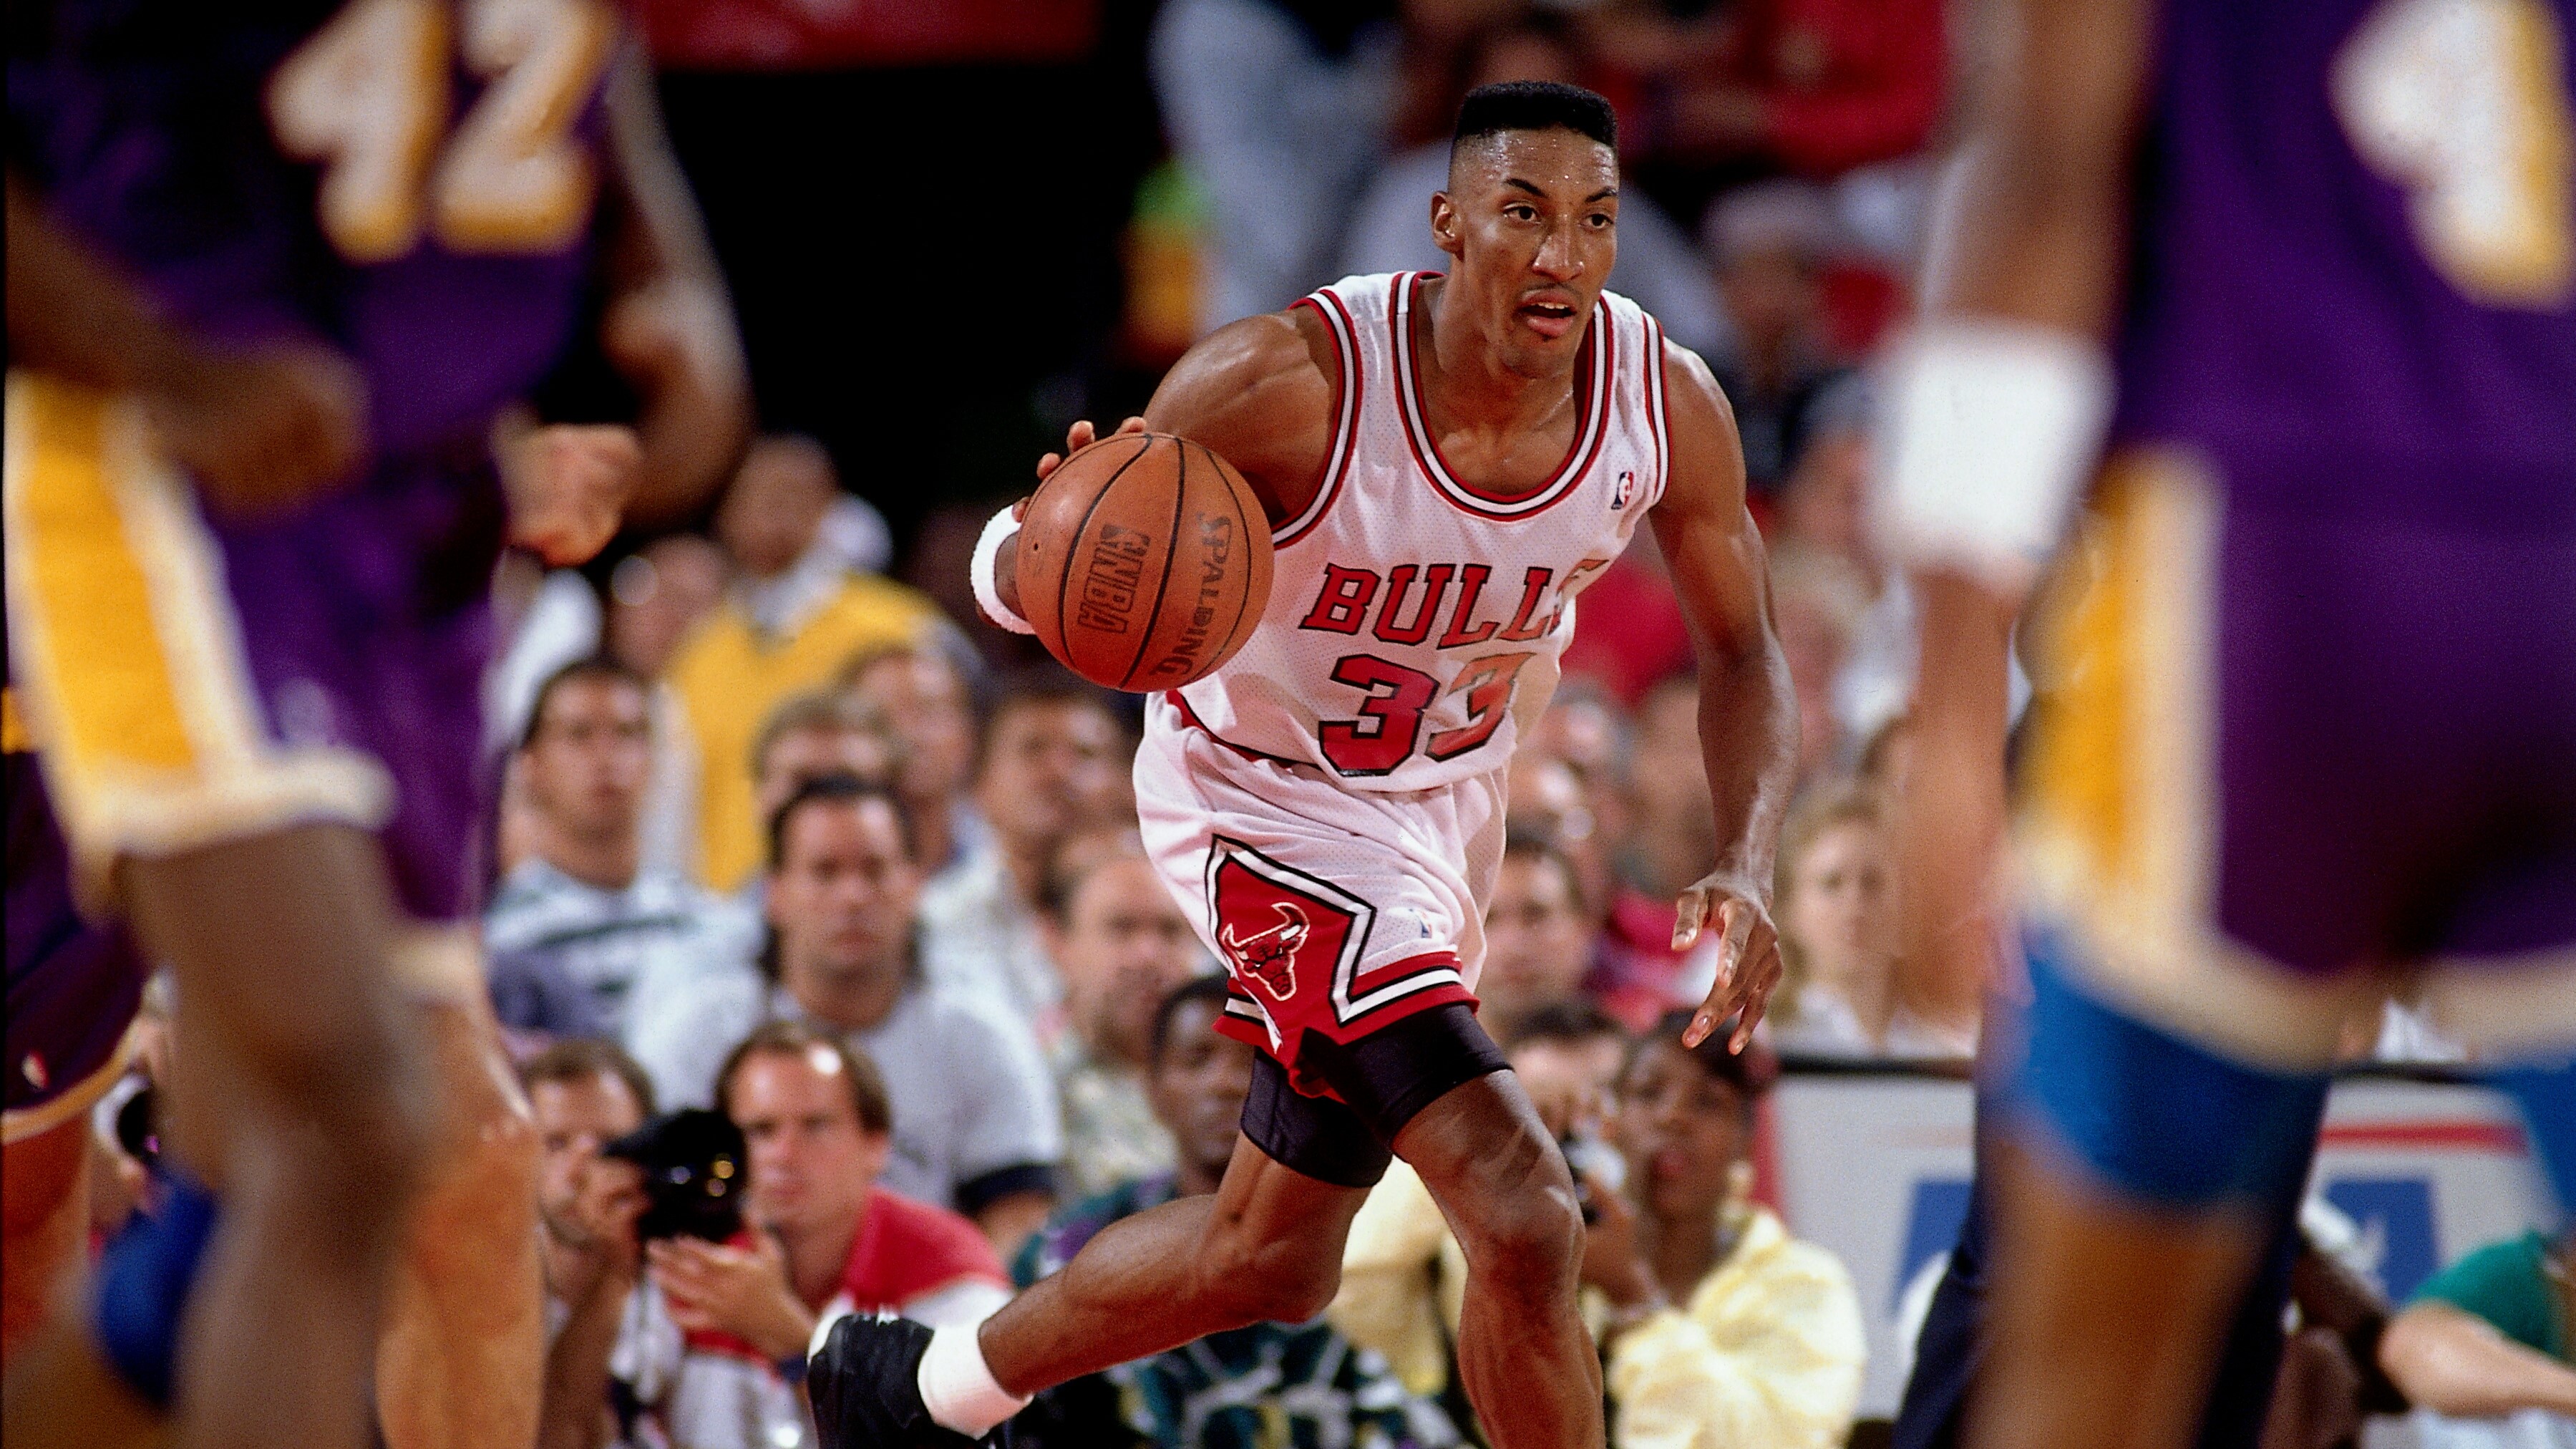 Chicago Bulls - On this day in Bulls history, Scottie Pippen's number 33  got retired. What was your favorite Pippen memory? #ThisBudsForYou  #LegendaryMoments